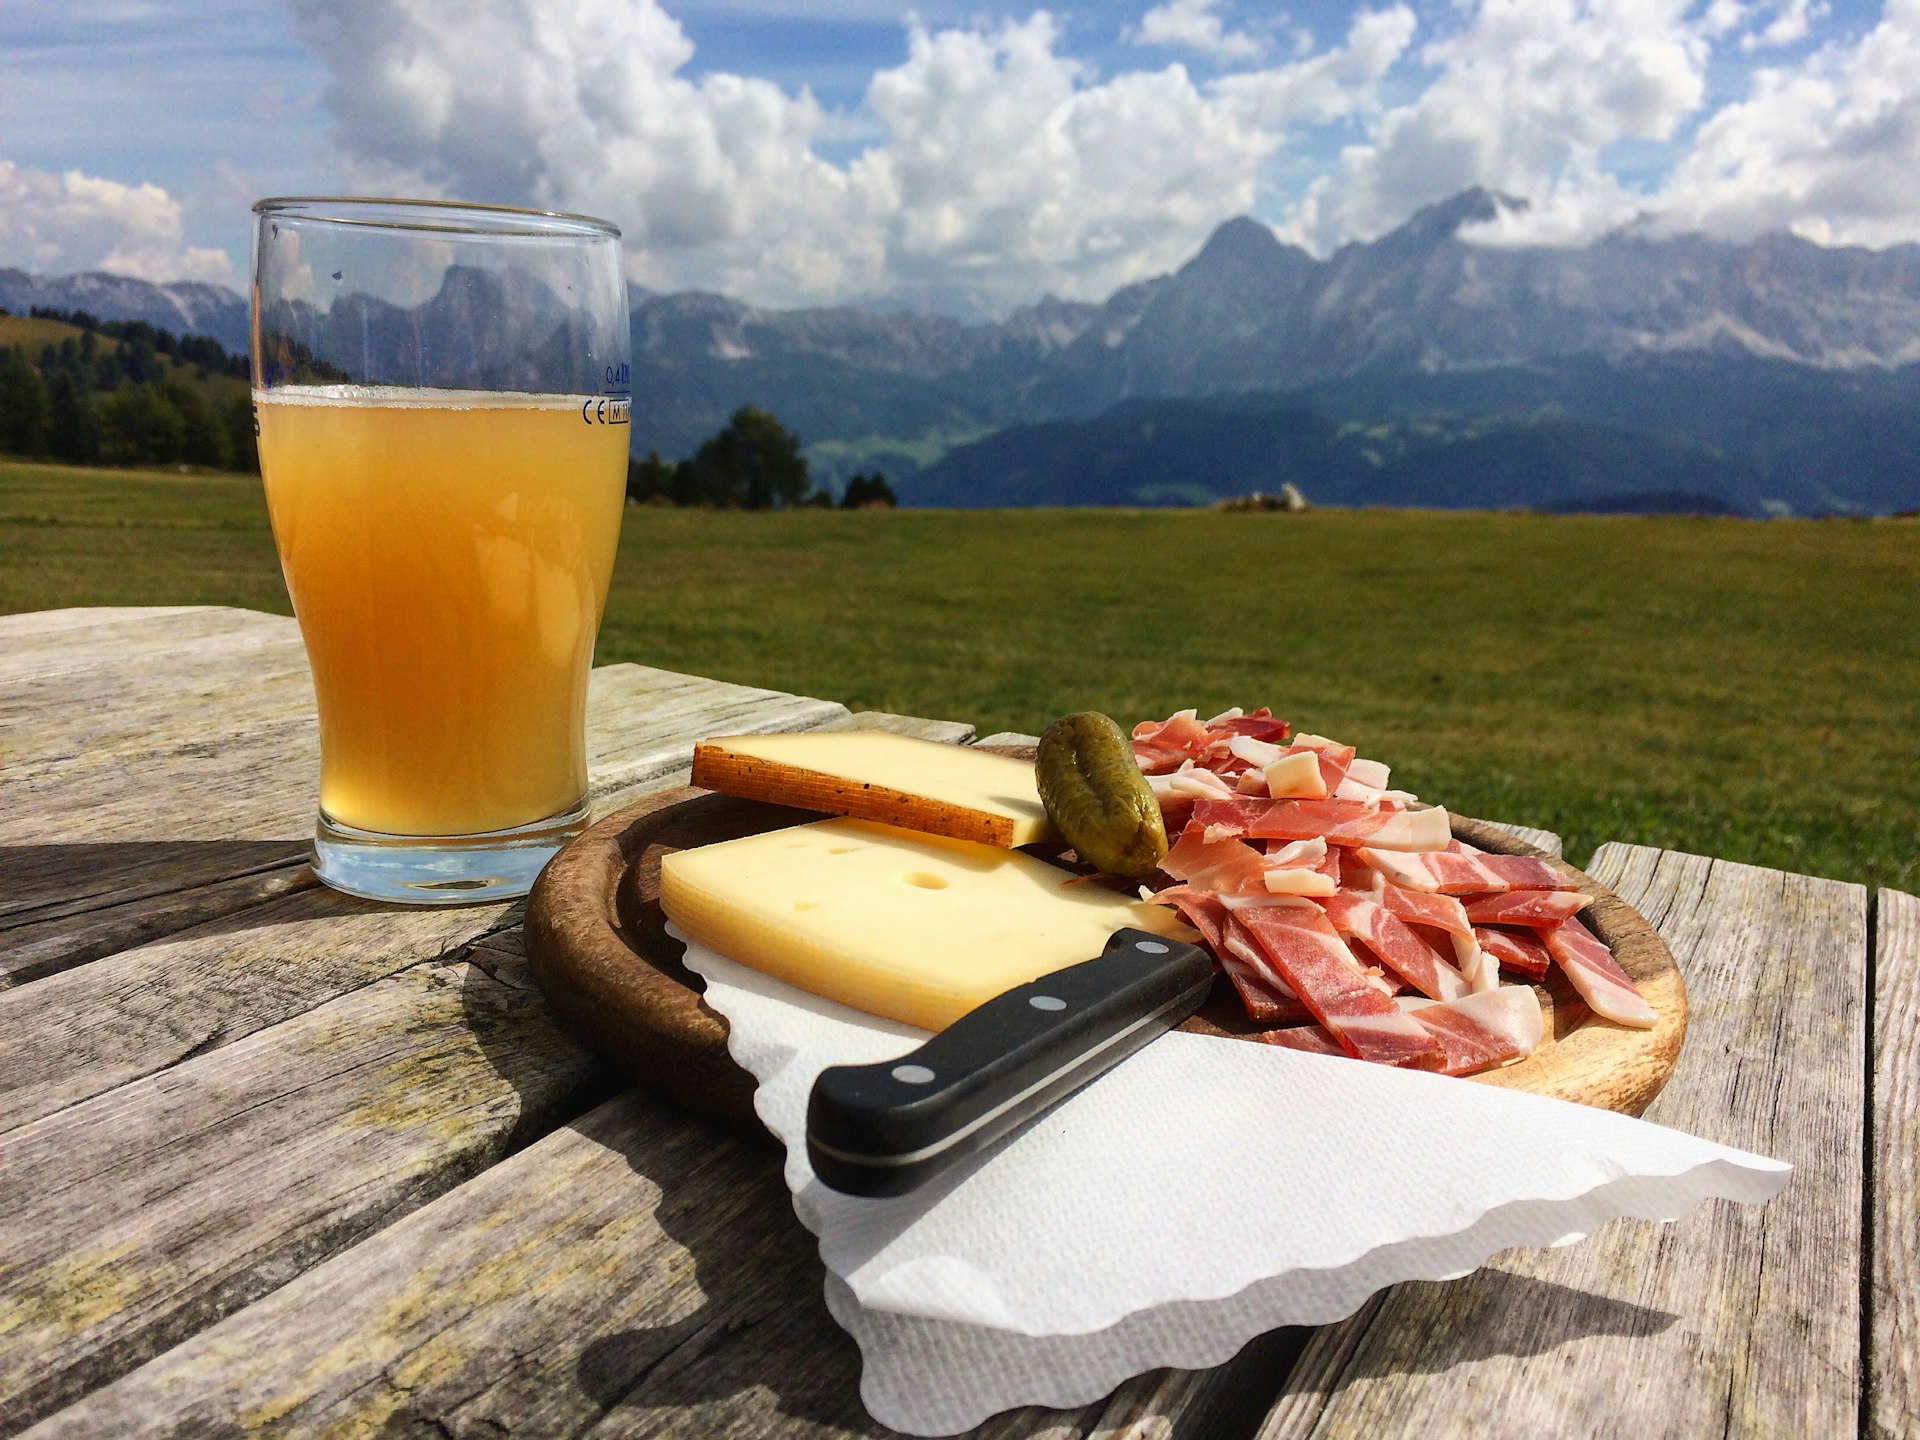 A plate of cheeses with some charcuterie meats on a table next to a beer